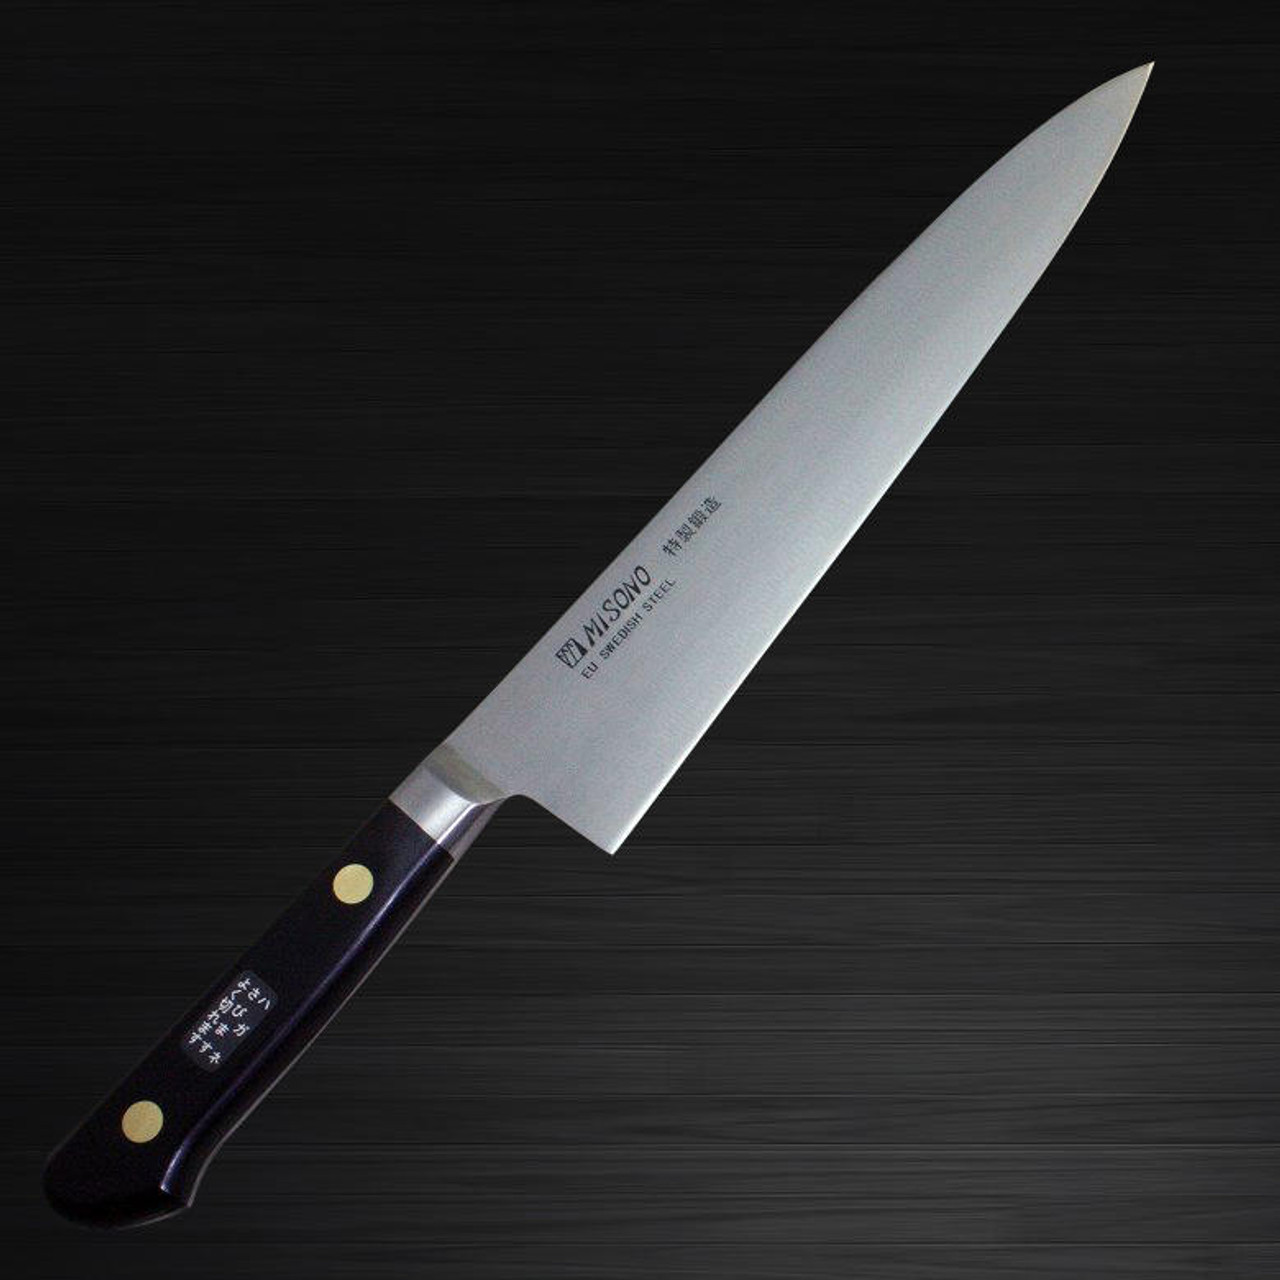 https://cdn11.bigcommerce.com/s-attnwxa/images/stencil/1280x1280/products/314/186242/misono-misono-swedish-high-carbon-steel-hand-finished-japanese-chefs-gyuto-knife-270mm__03228.1635509719.jpg?c=2